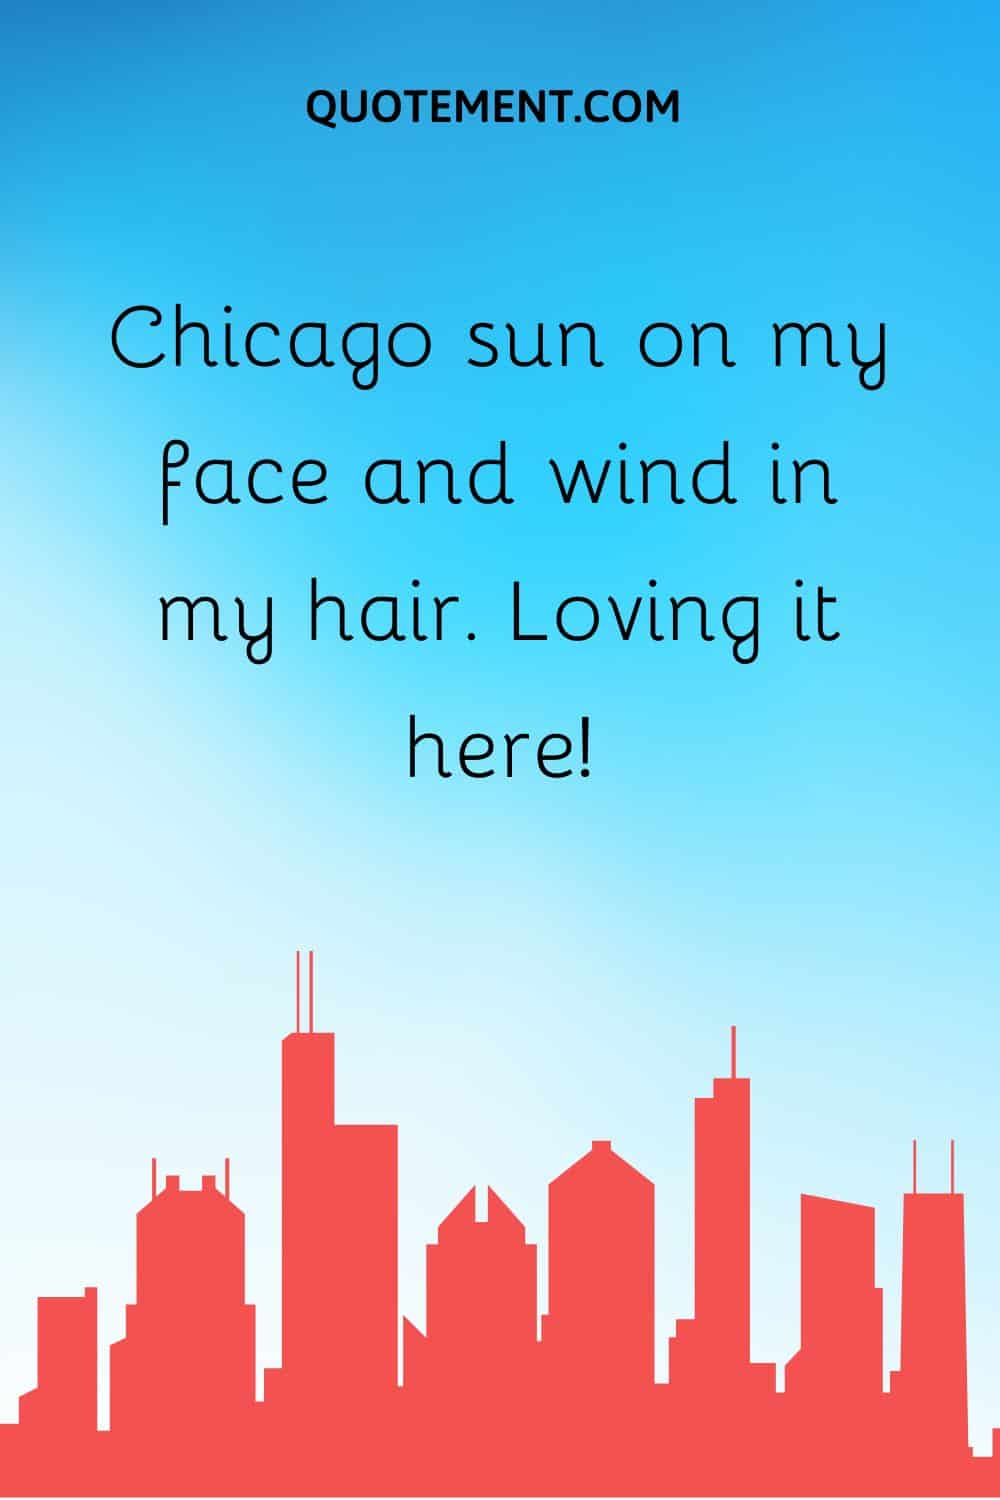 Chicago sun on my face and wind in my hair. Loving it here!